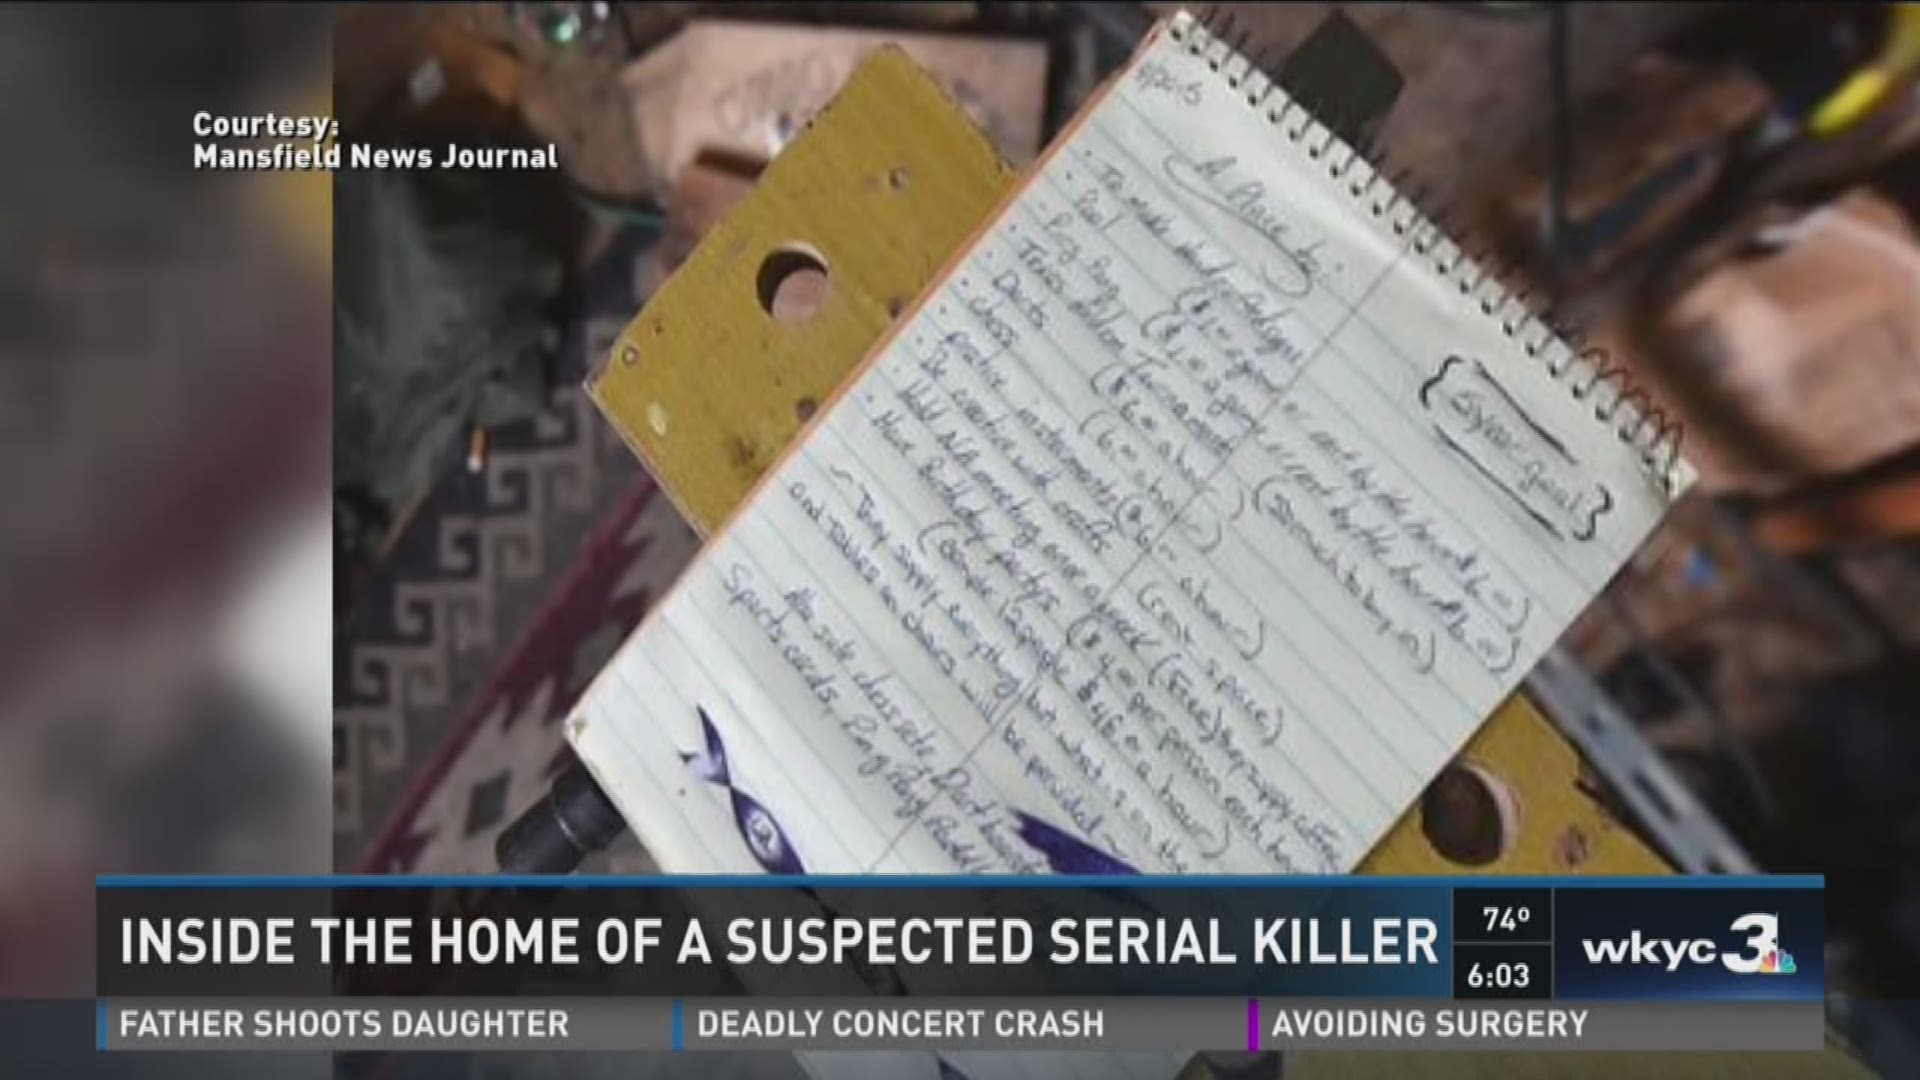 Inside the home of a suspected serial killer